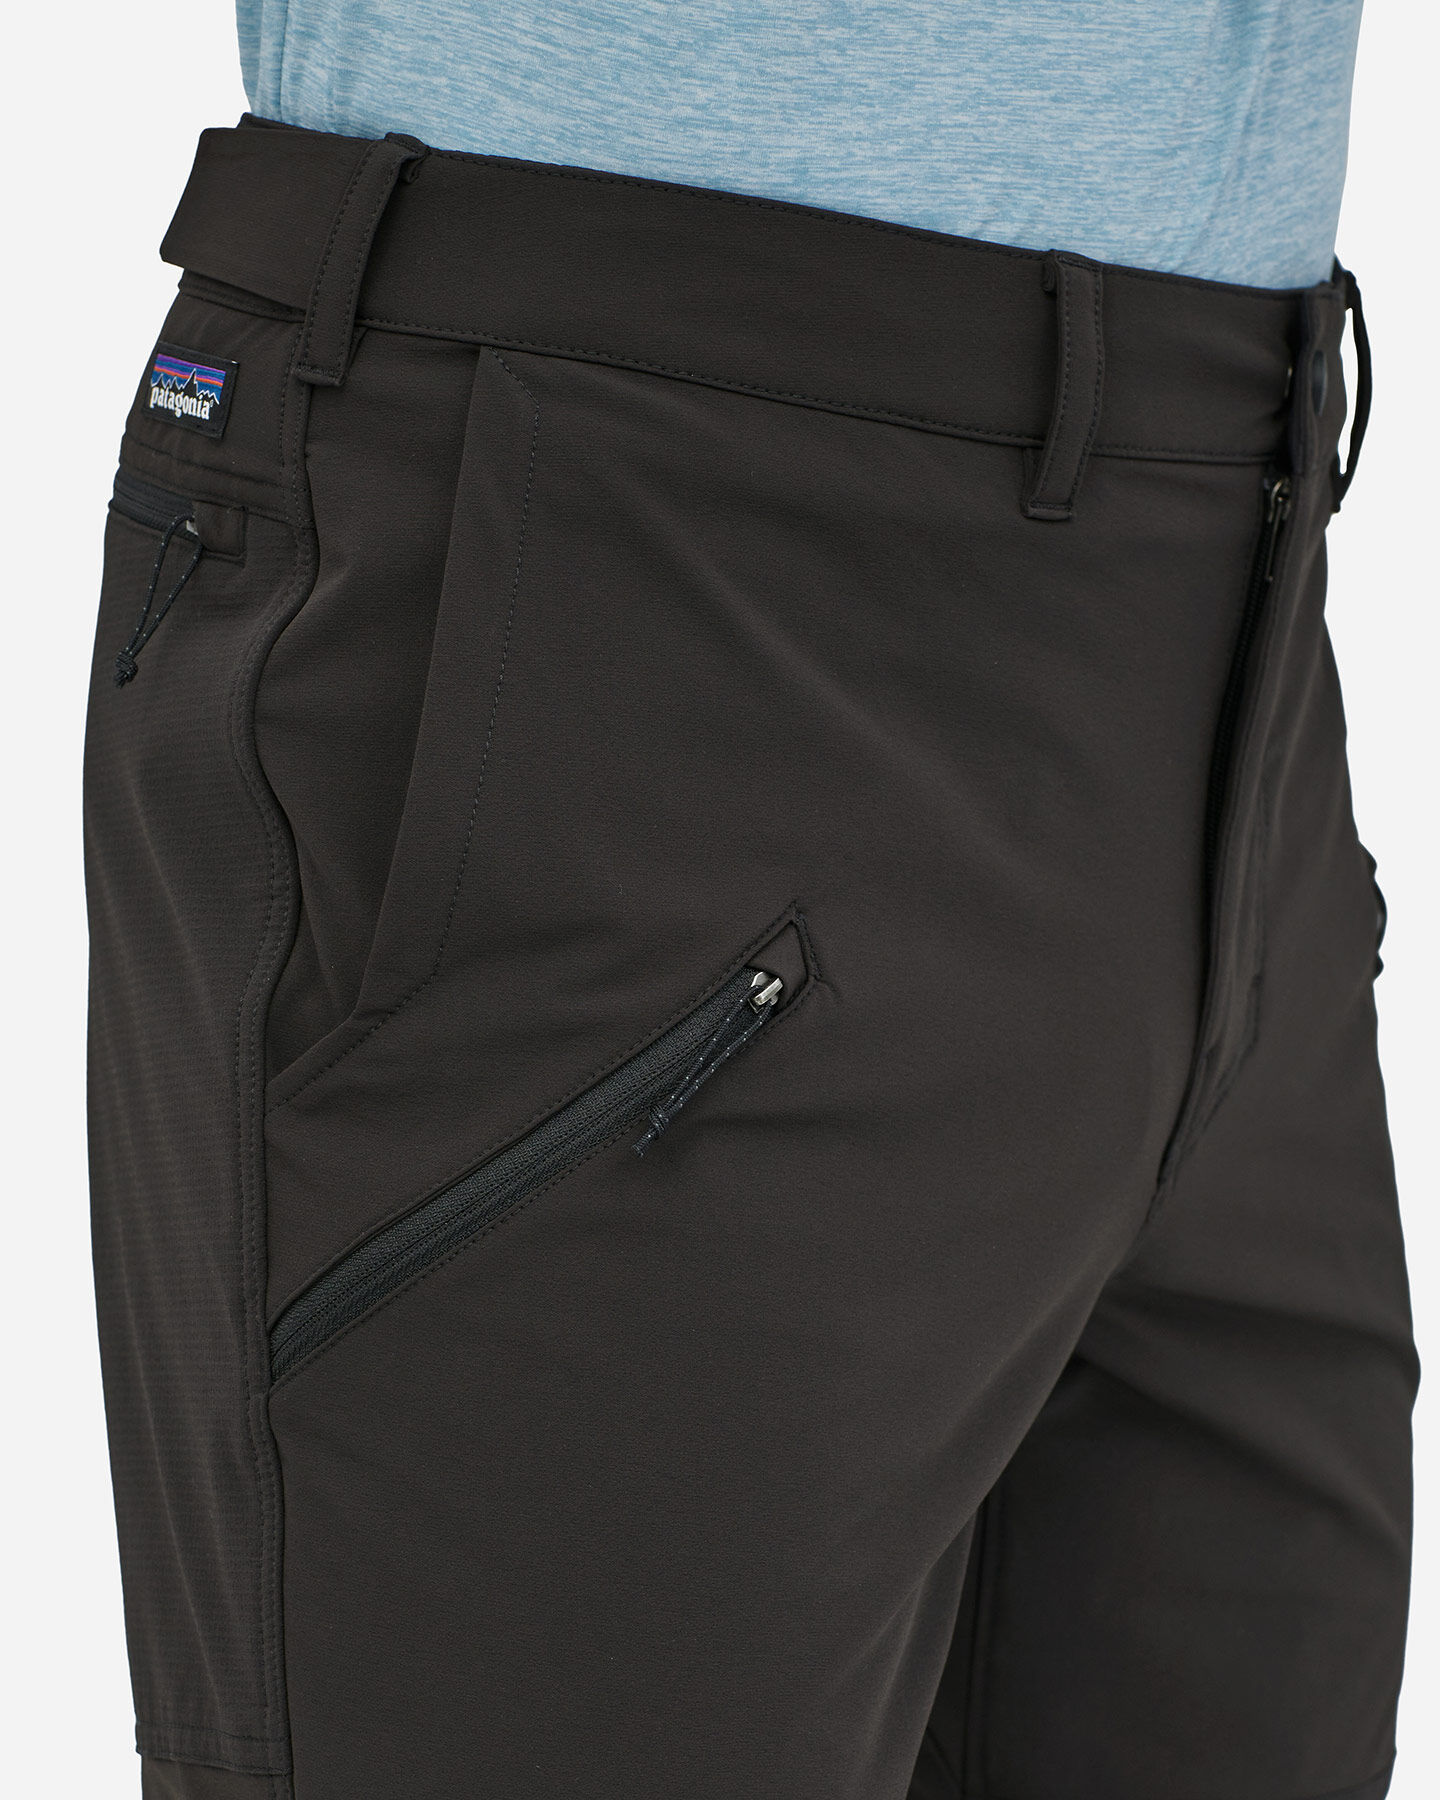  Pantalone outdoor PATAGONIA POINT PEAK TRAIL M S4097087|BLK|30 scatto 3